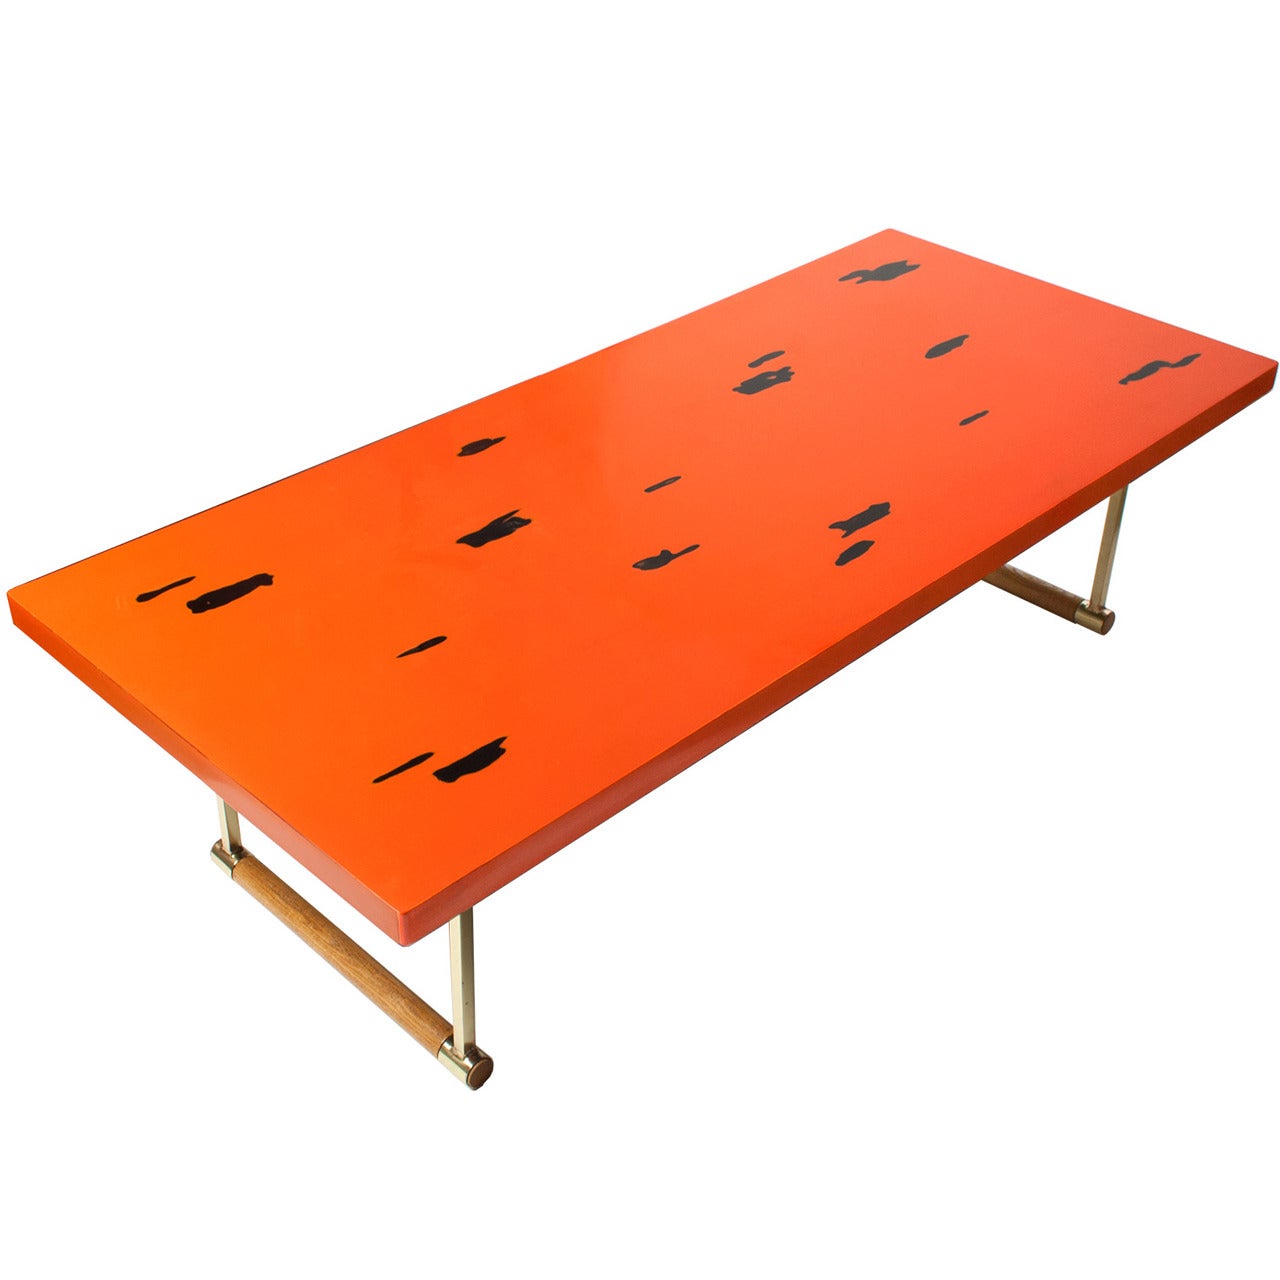 Japanese Mid-Century Modern Coffee Table in Negoro Lacquer Technique